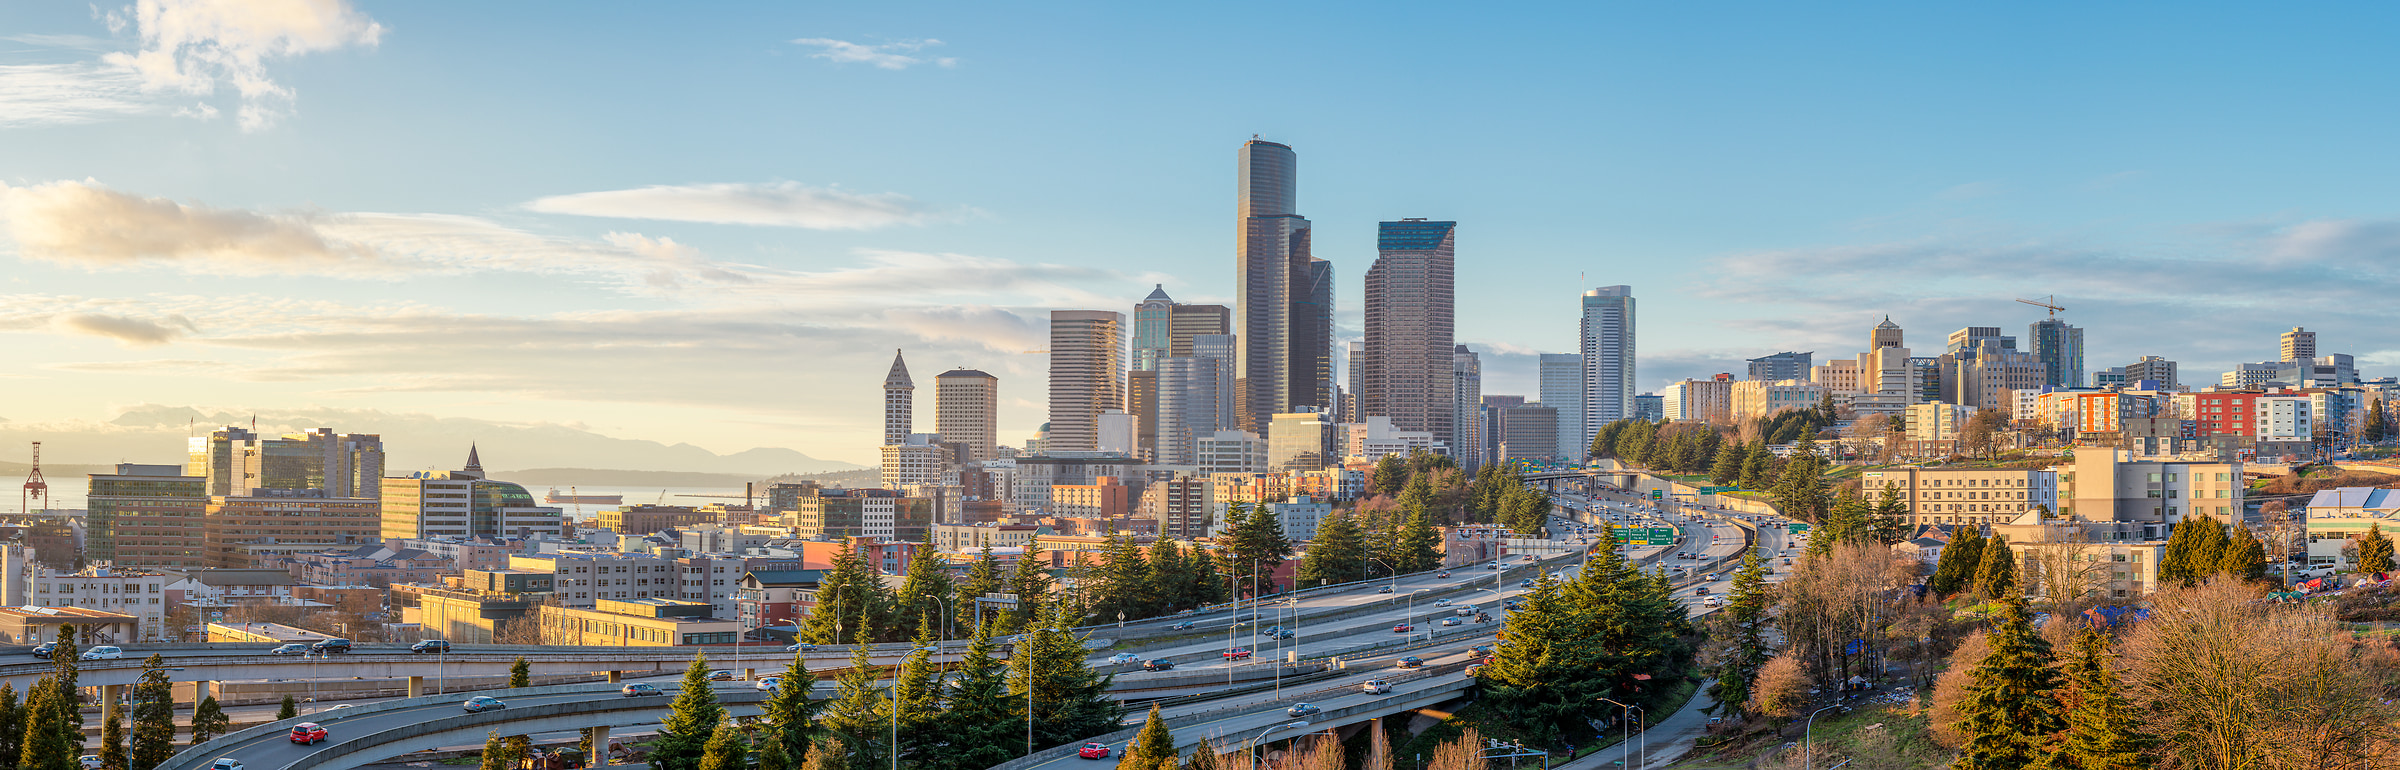 222 megapixels! A very high resolution, large-format, panorama photo print of the Seattle skyline during the day; photograph created by Greg Probst in Seattle, Washington